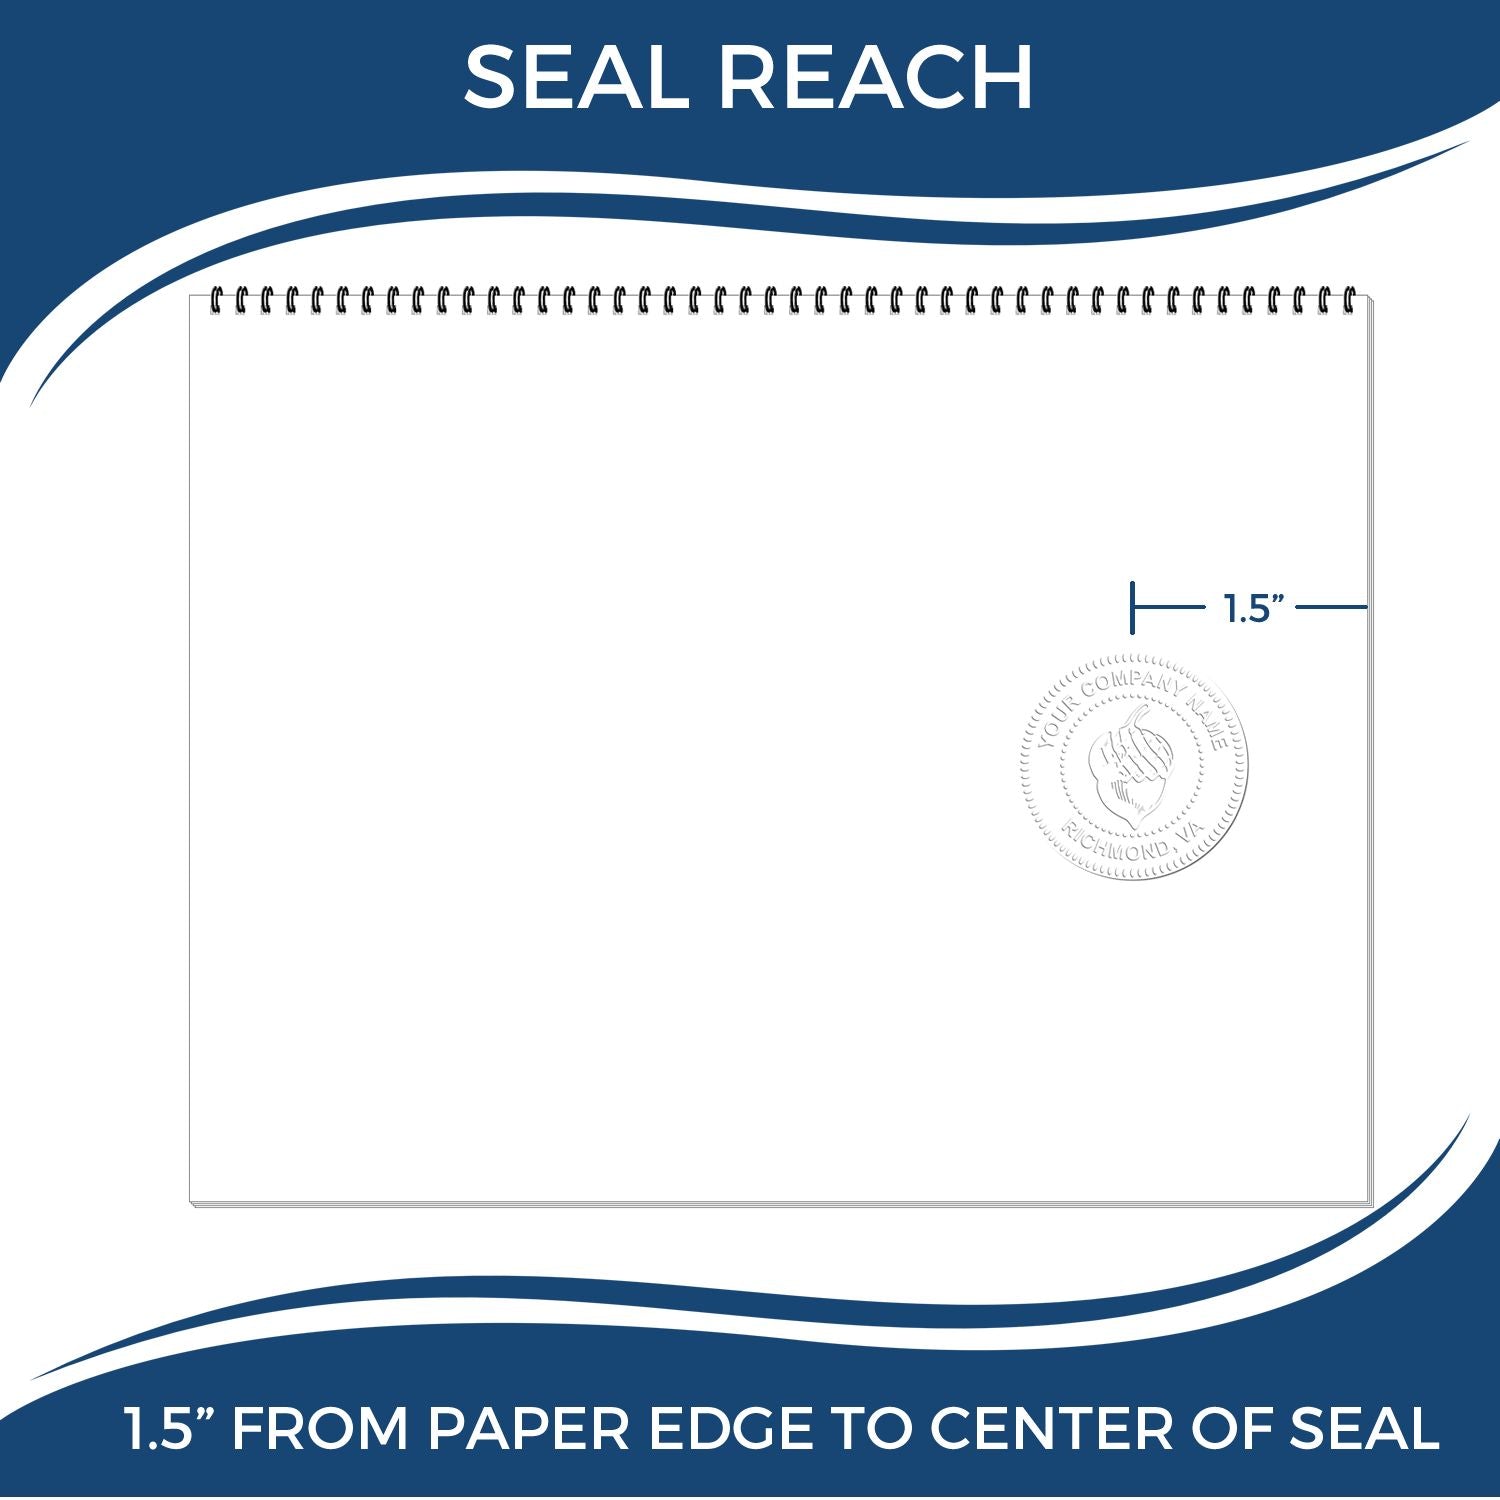 An infographic showing the seal reach which is represented by a ruler and a miniature seal image of the Puerto Rico Engineer Desk Seal